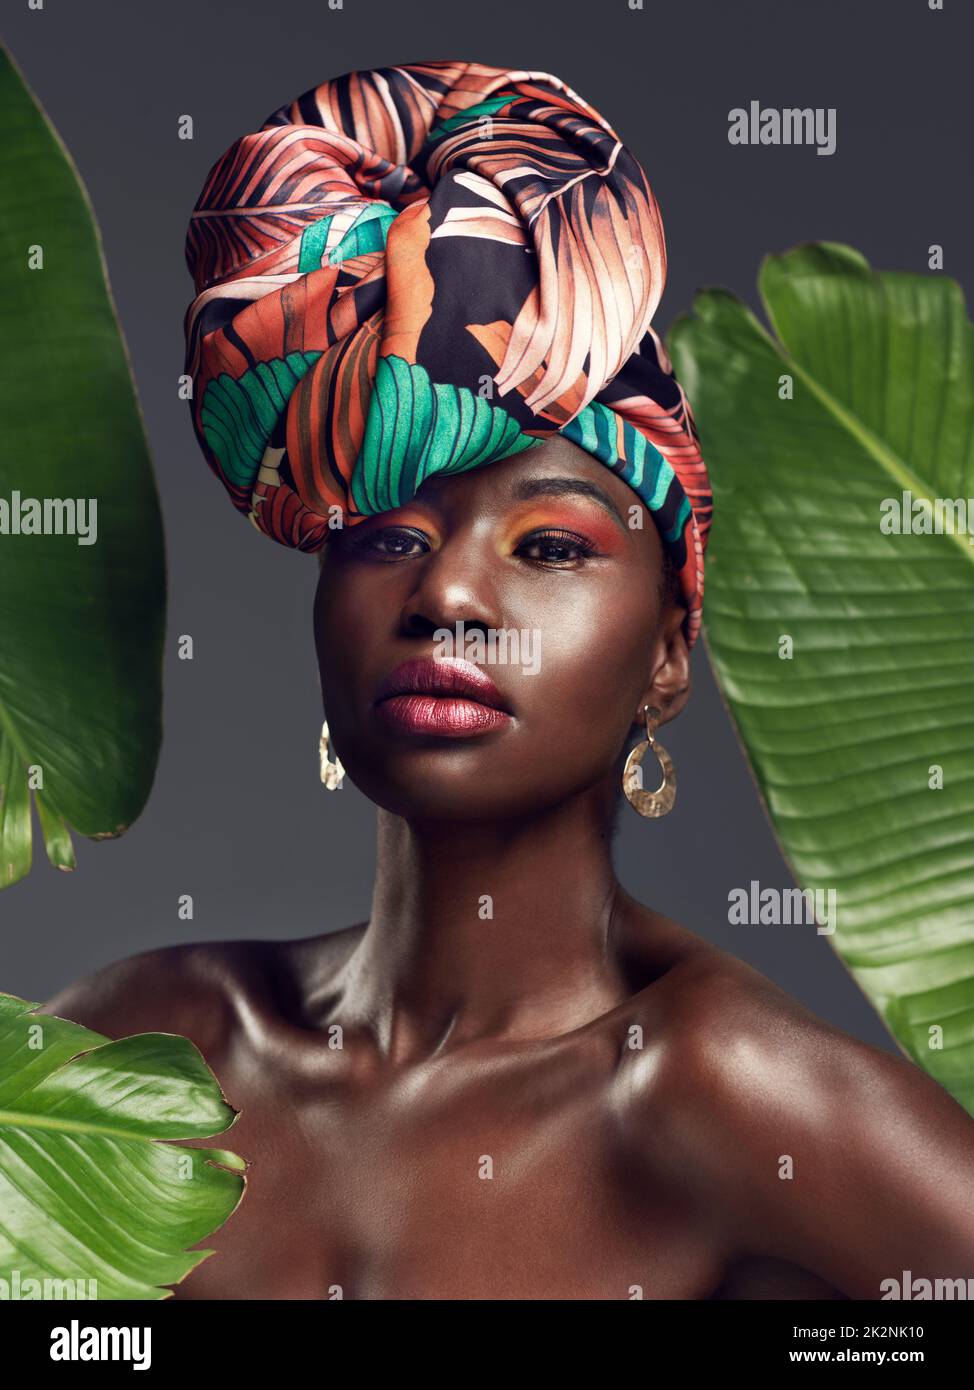 More than just cloth, its my crown. Studio shot of a beautiful young woman wearing a traditional African head wrap against a leafy background. Stock Photo